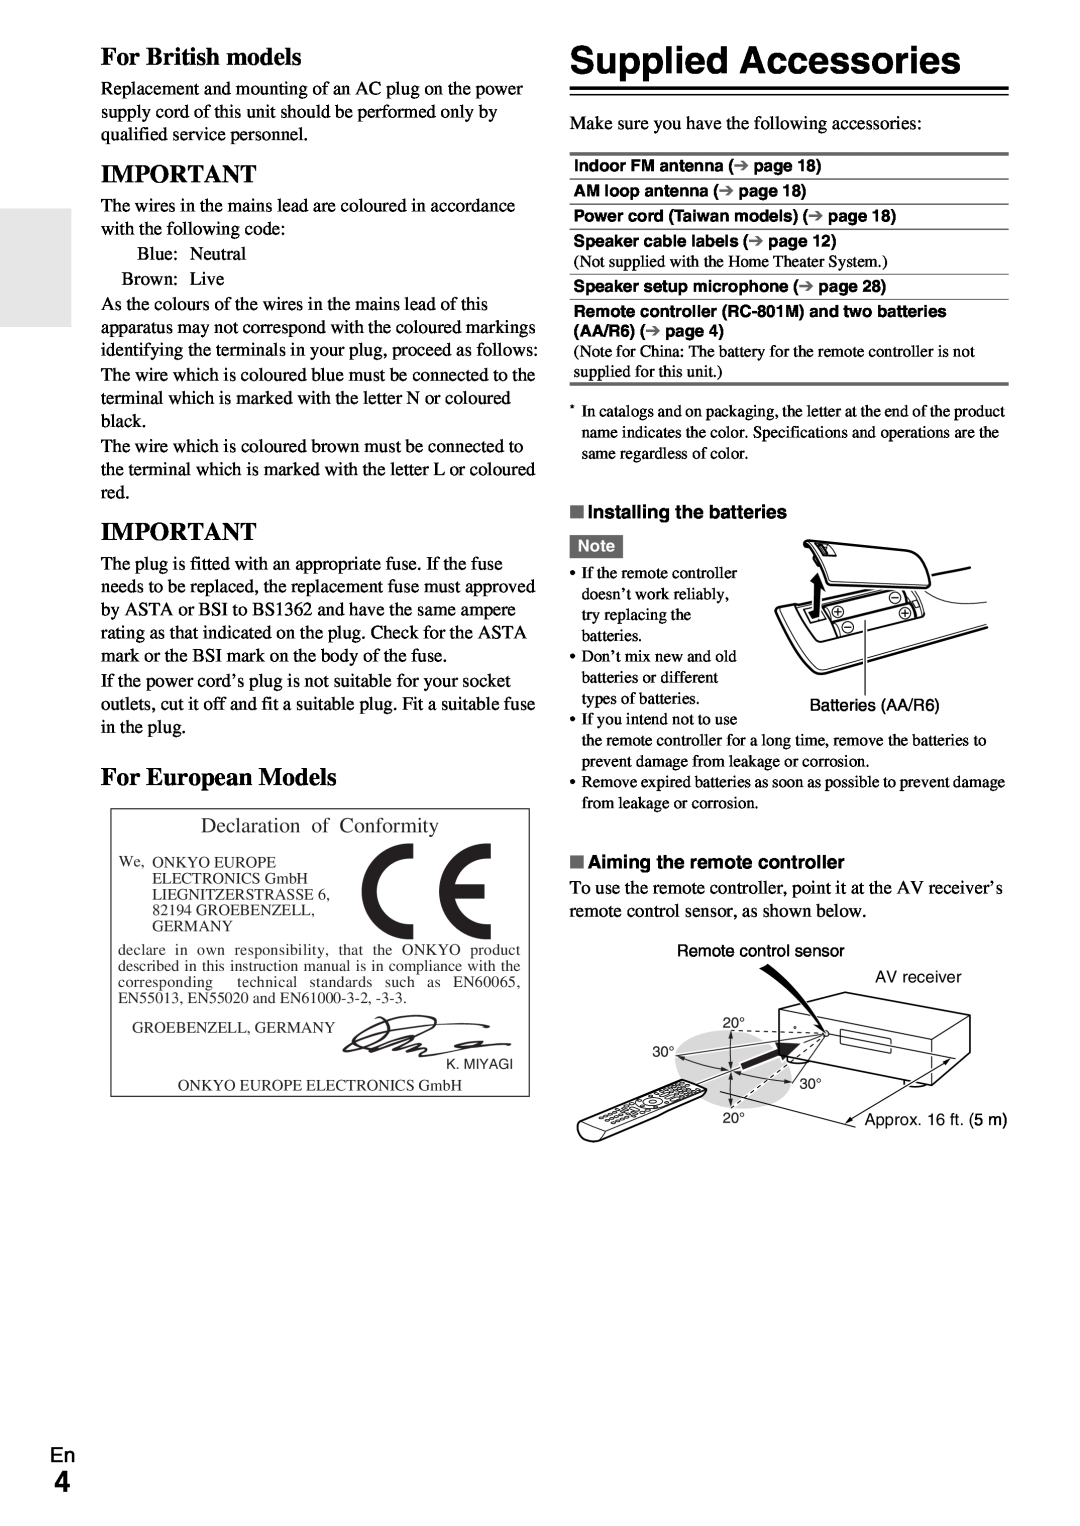 Onkyo TX-NR509 instruction manual Supplied Accessories, For British models, For European Models, Declaration of Conformity 